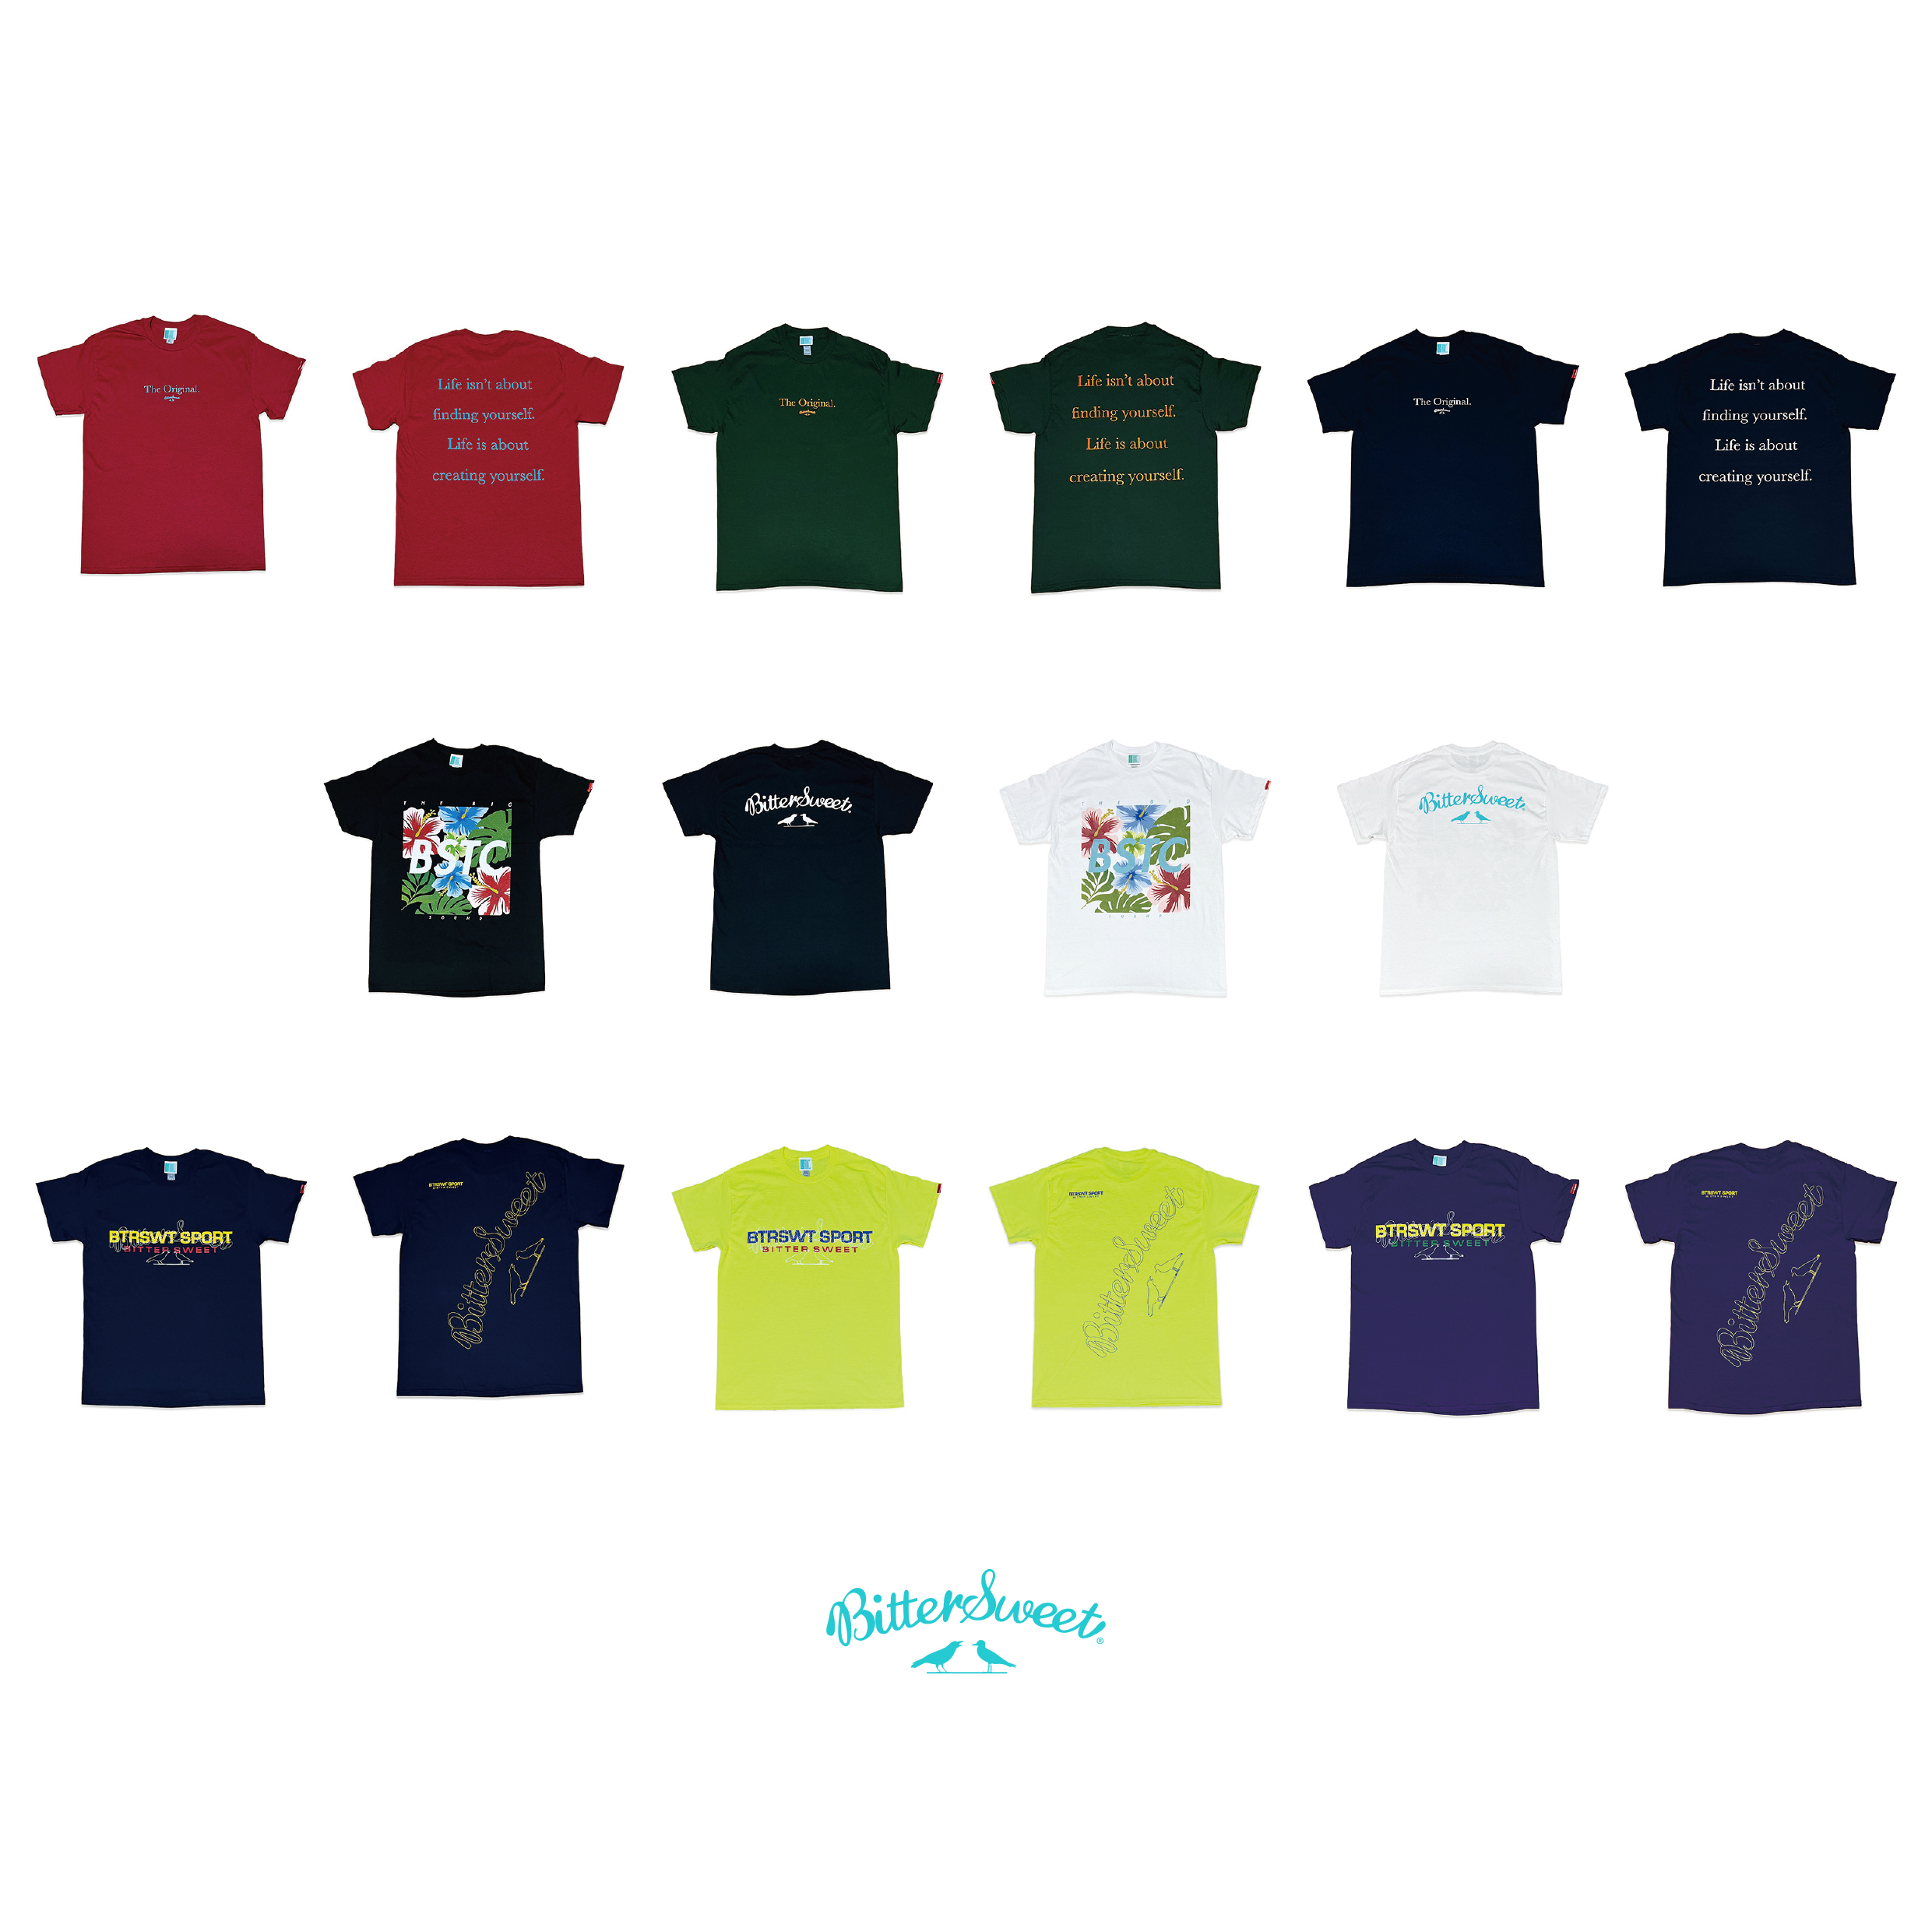 S/S 2022 COLLECTION WEEK #13 今晩9時より販売開始です！